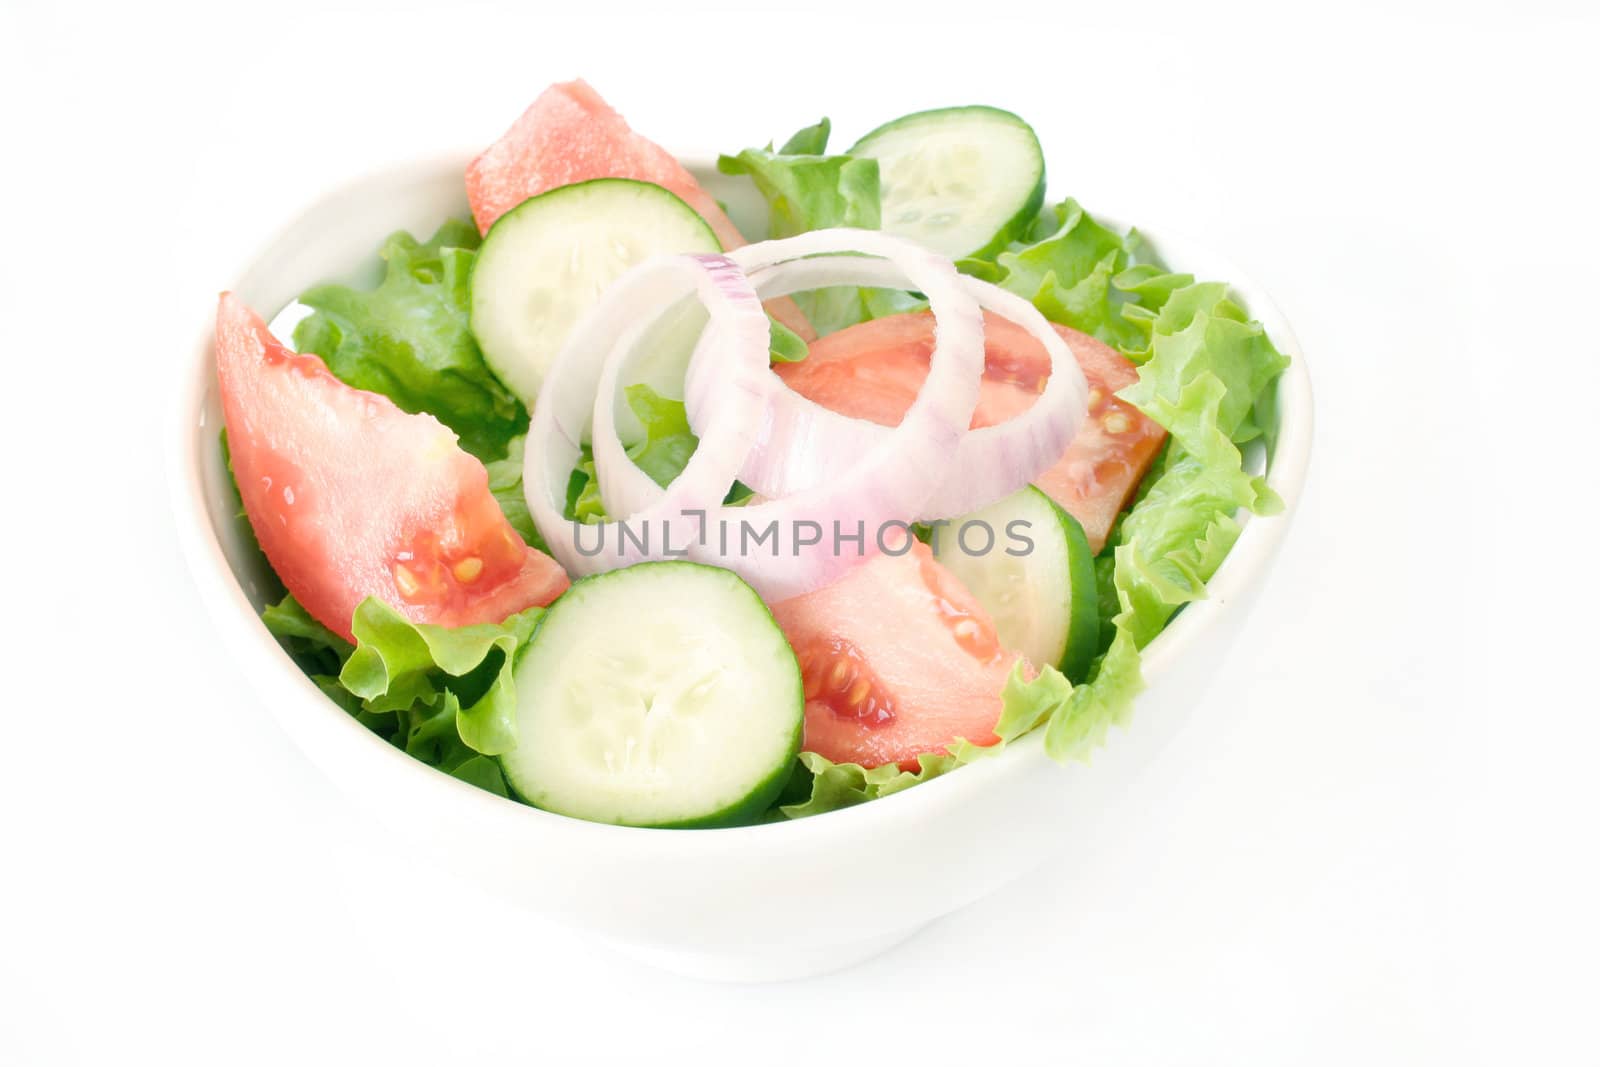 House salad in a white bowl and shot on a white background.